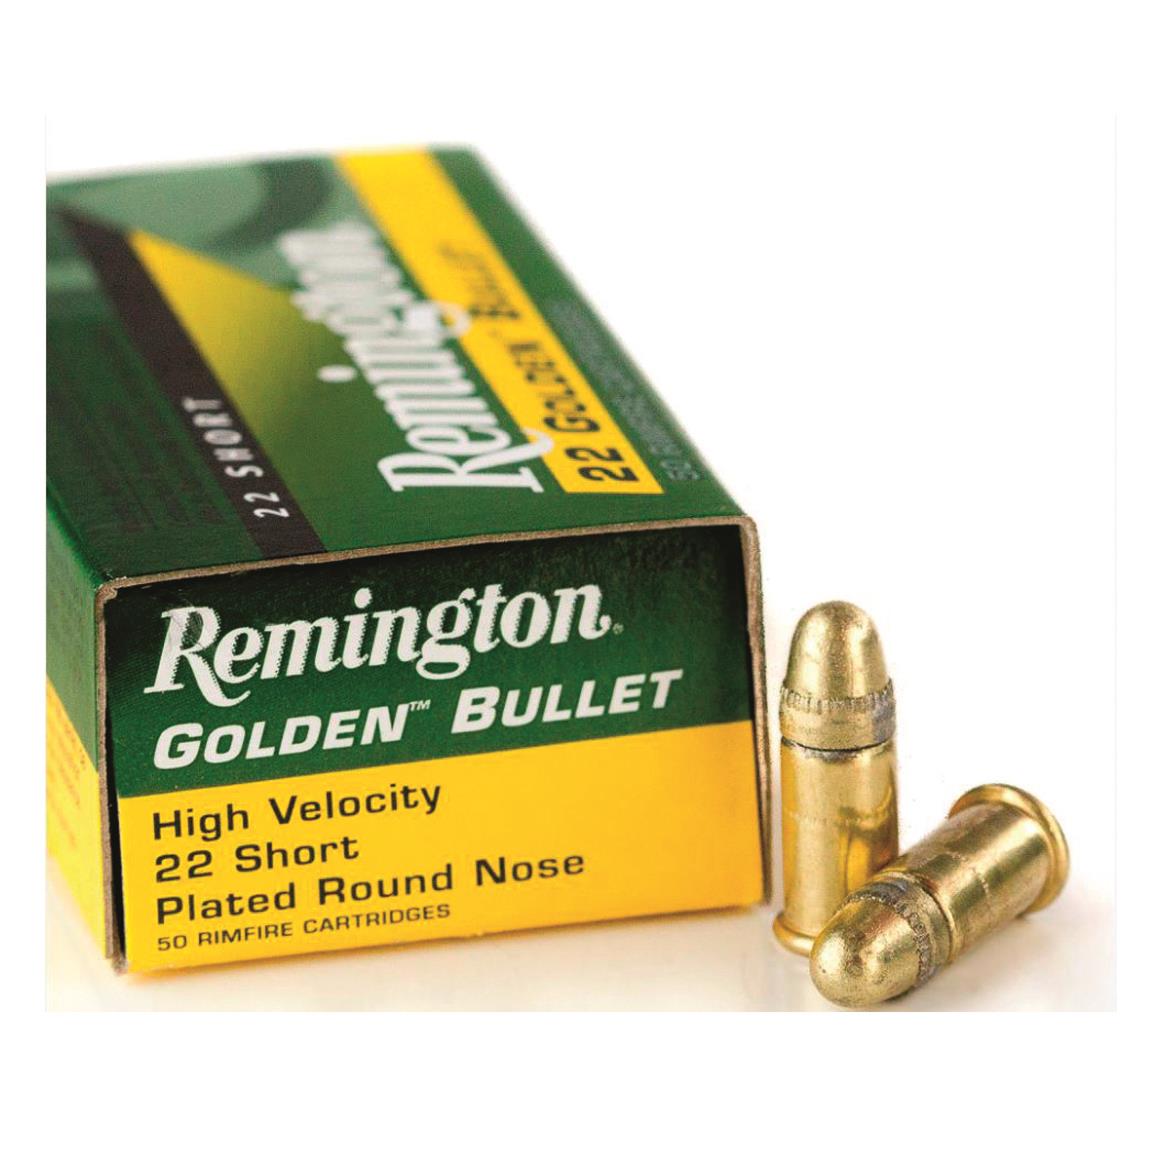 remington-golden-bullet-22-short-high-velocity-plated-round-nose-free